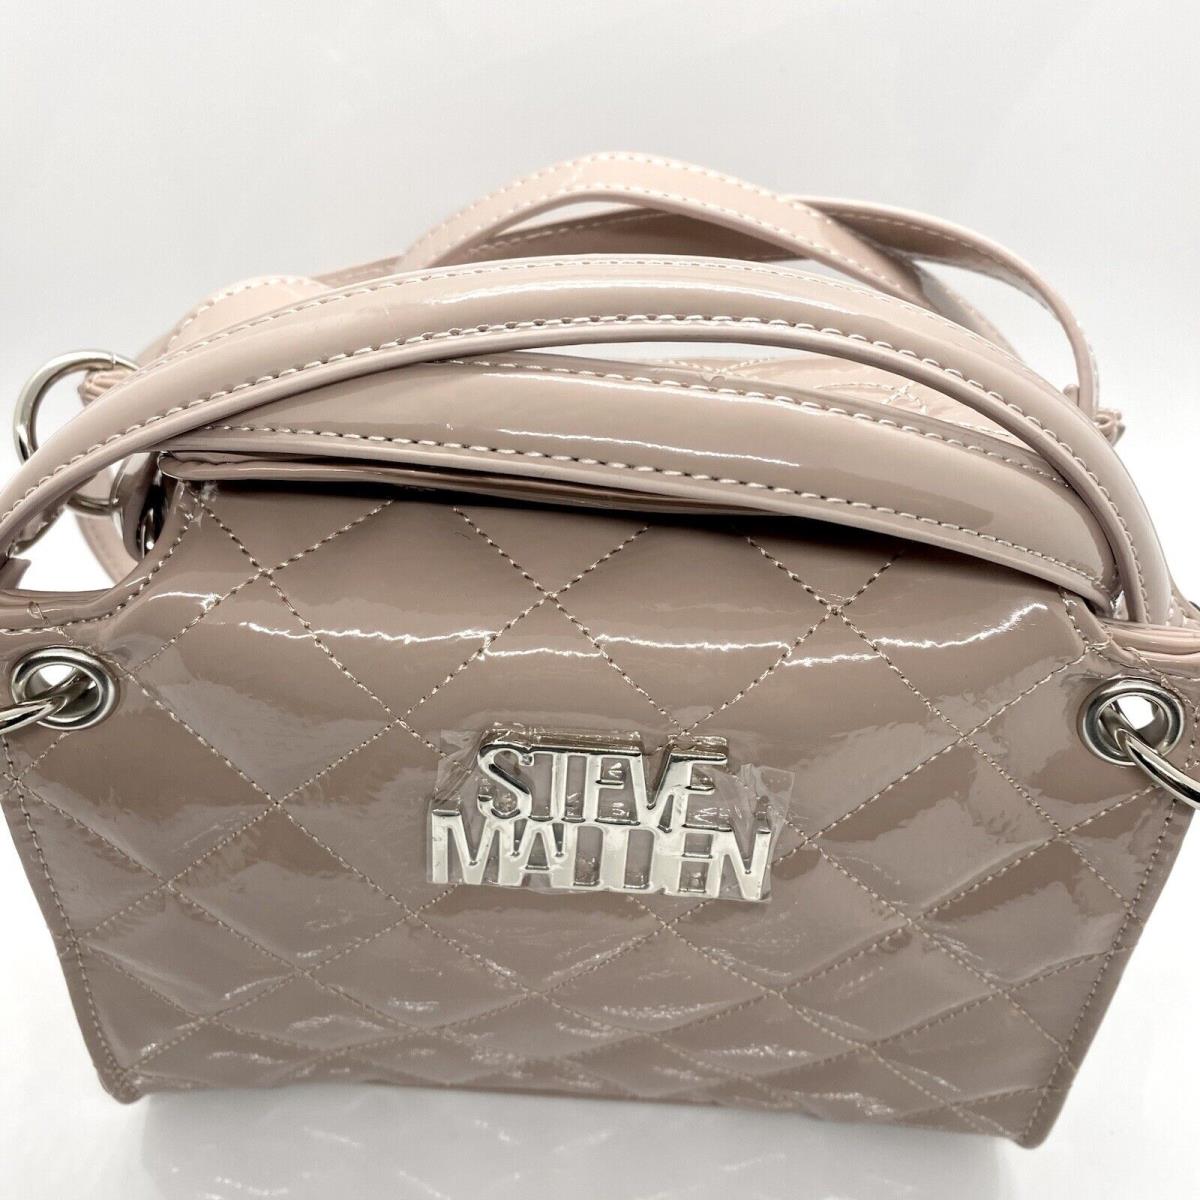 Steve Madden Small Patent Leather Quilted Box Crossbody Bag Purse Pink